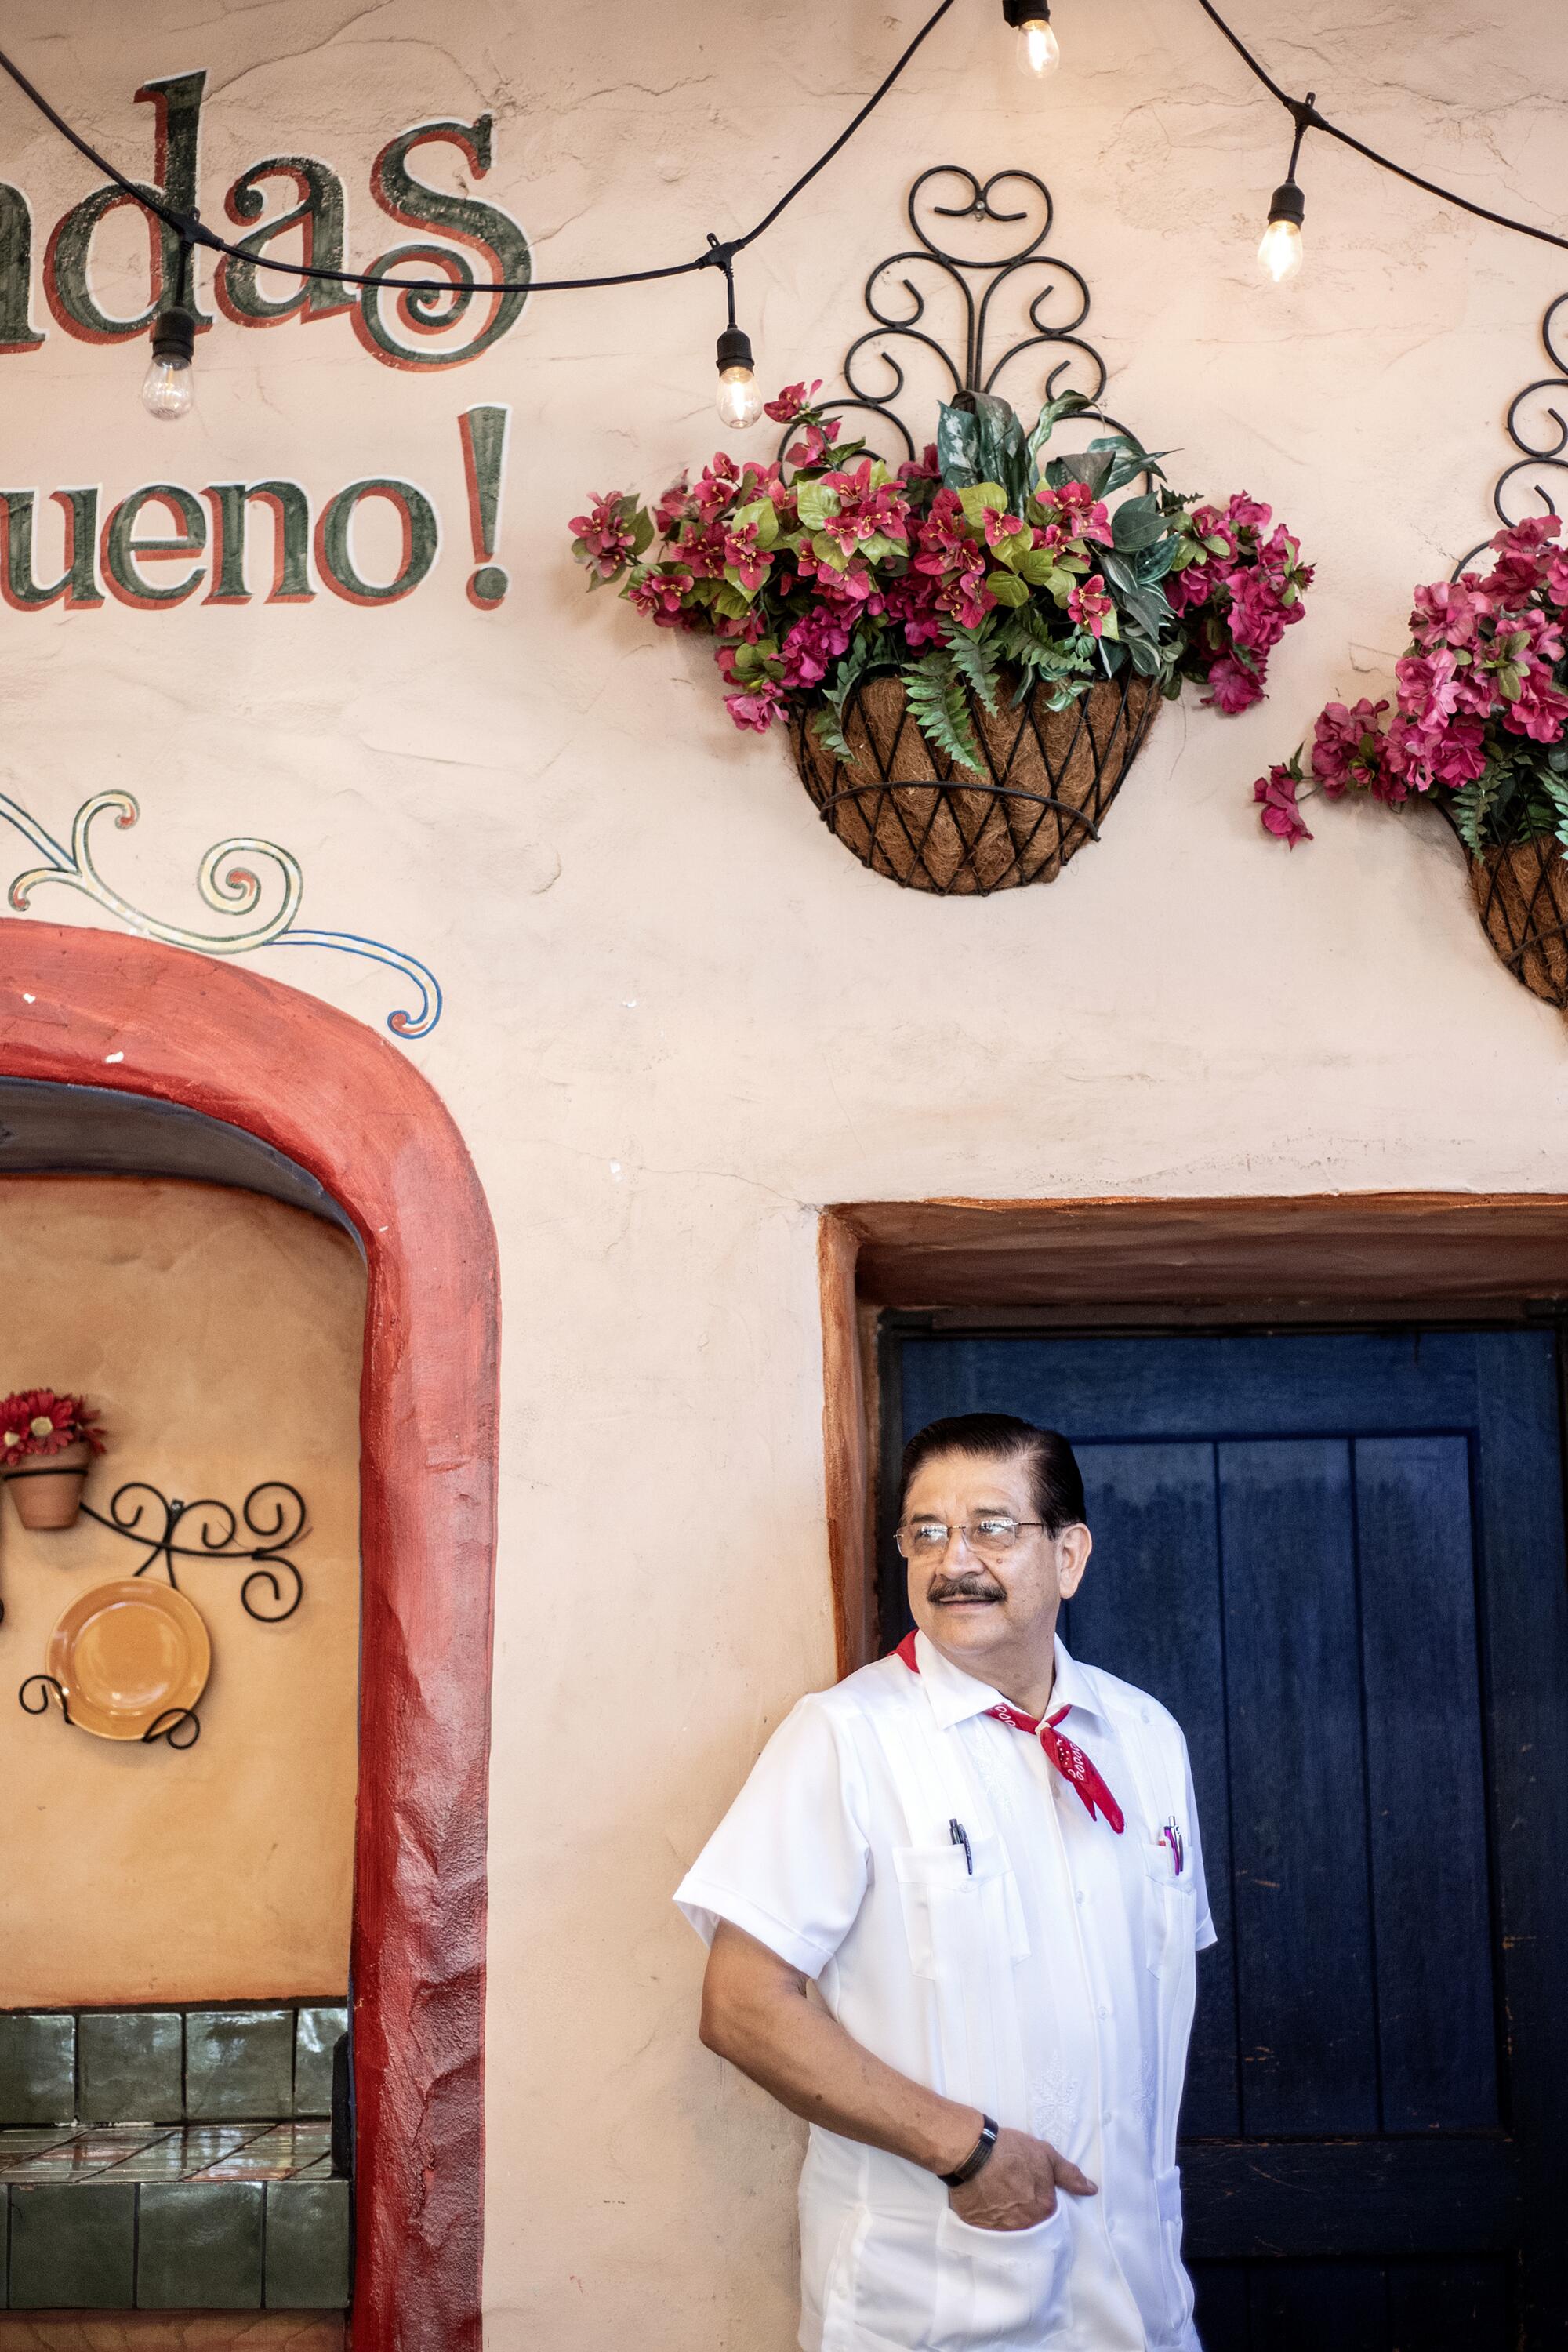 Justino Romero leaning against a wall in El Cholo restaurant.